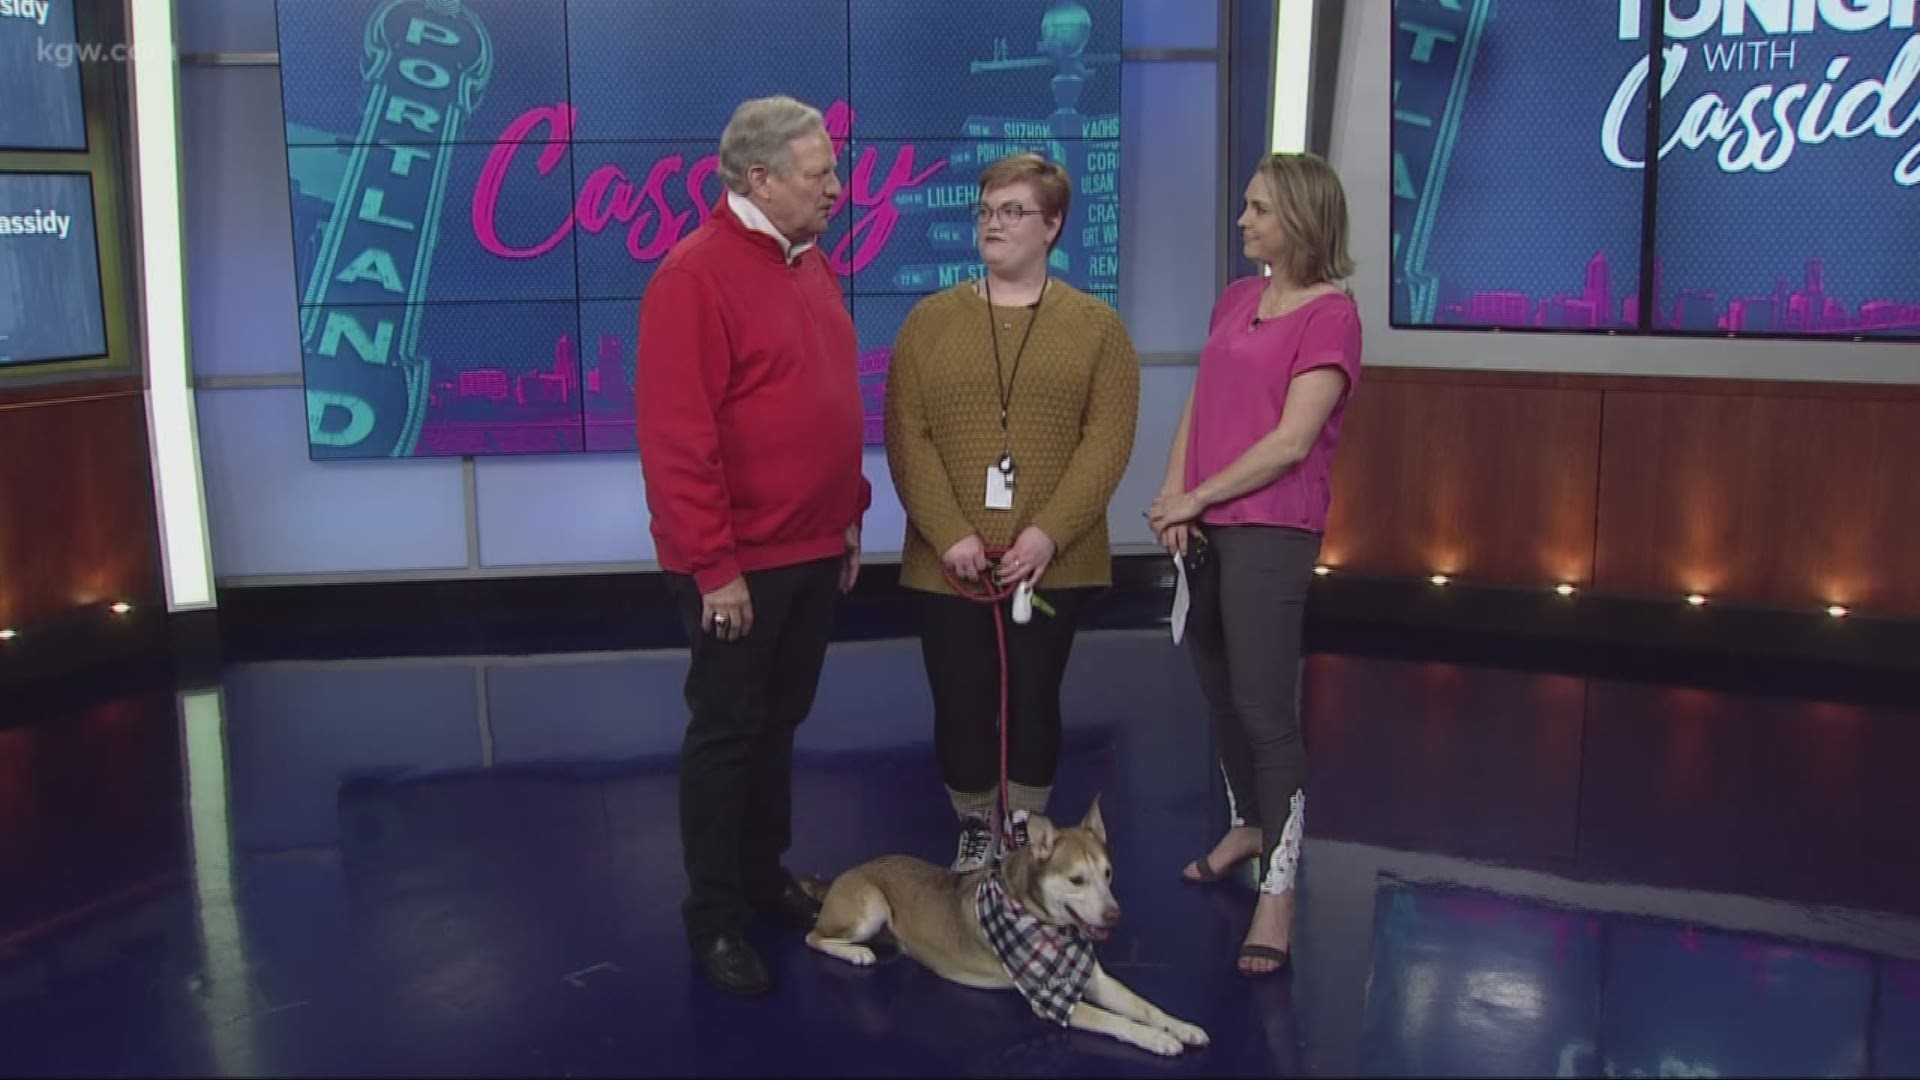 Check out the Beverly Hills Dog Show on Sunday morning on KGW. The show is co-hosted by David Frei.

#TonightwithCassidy